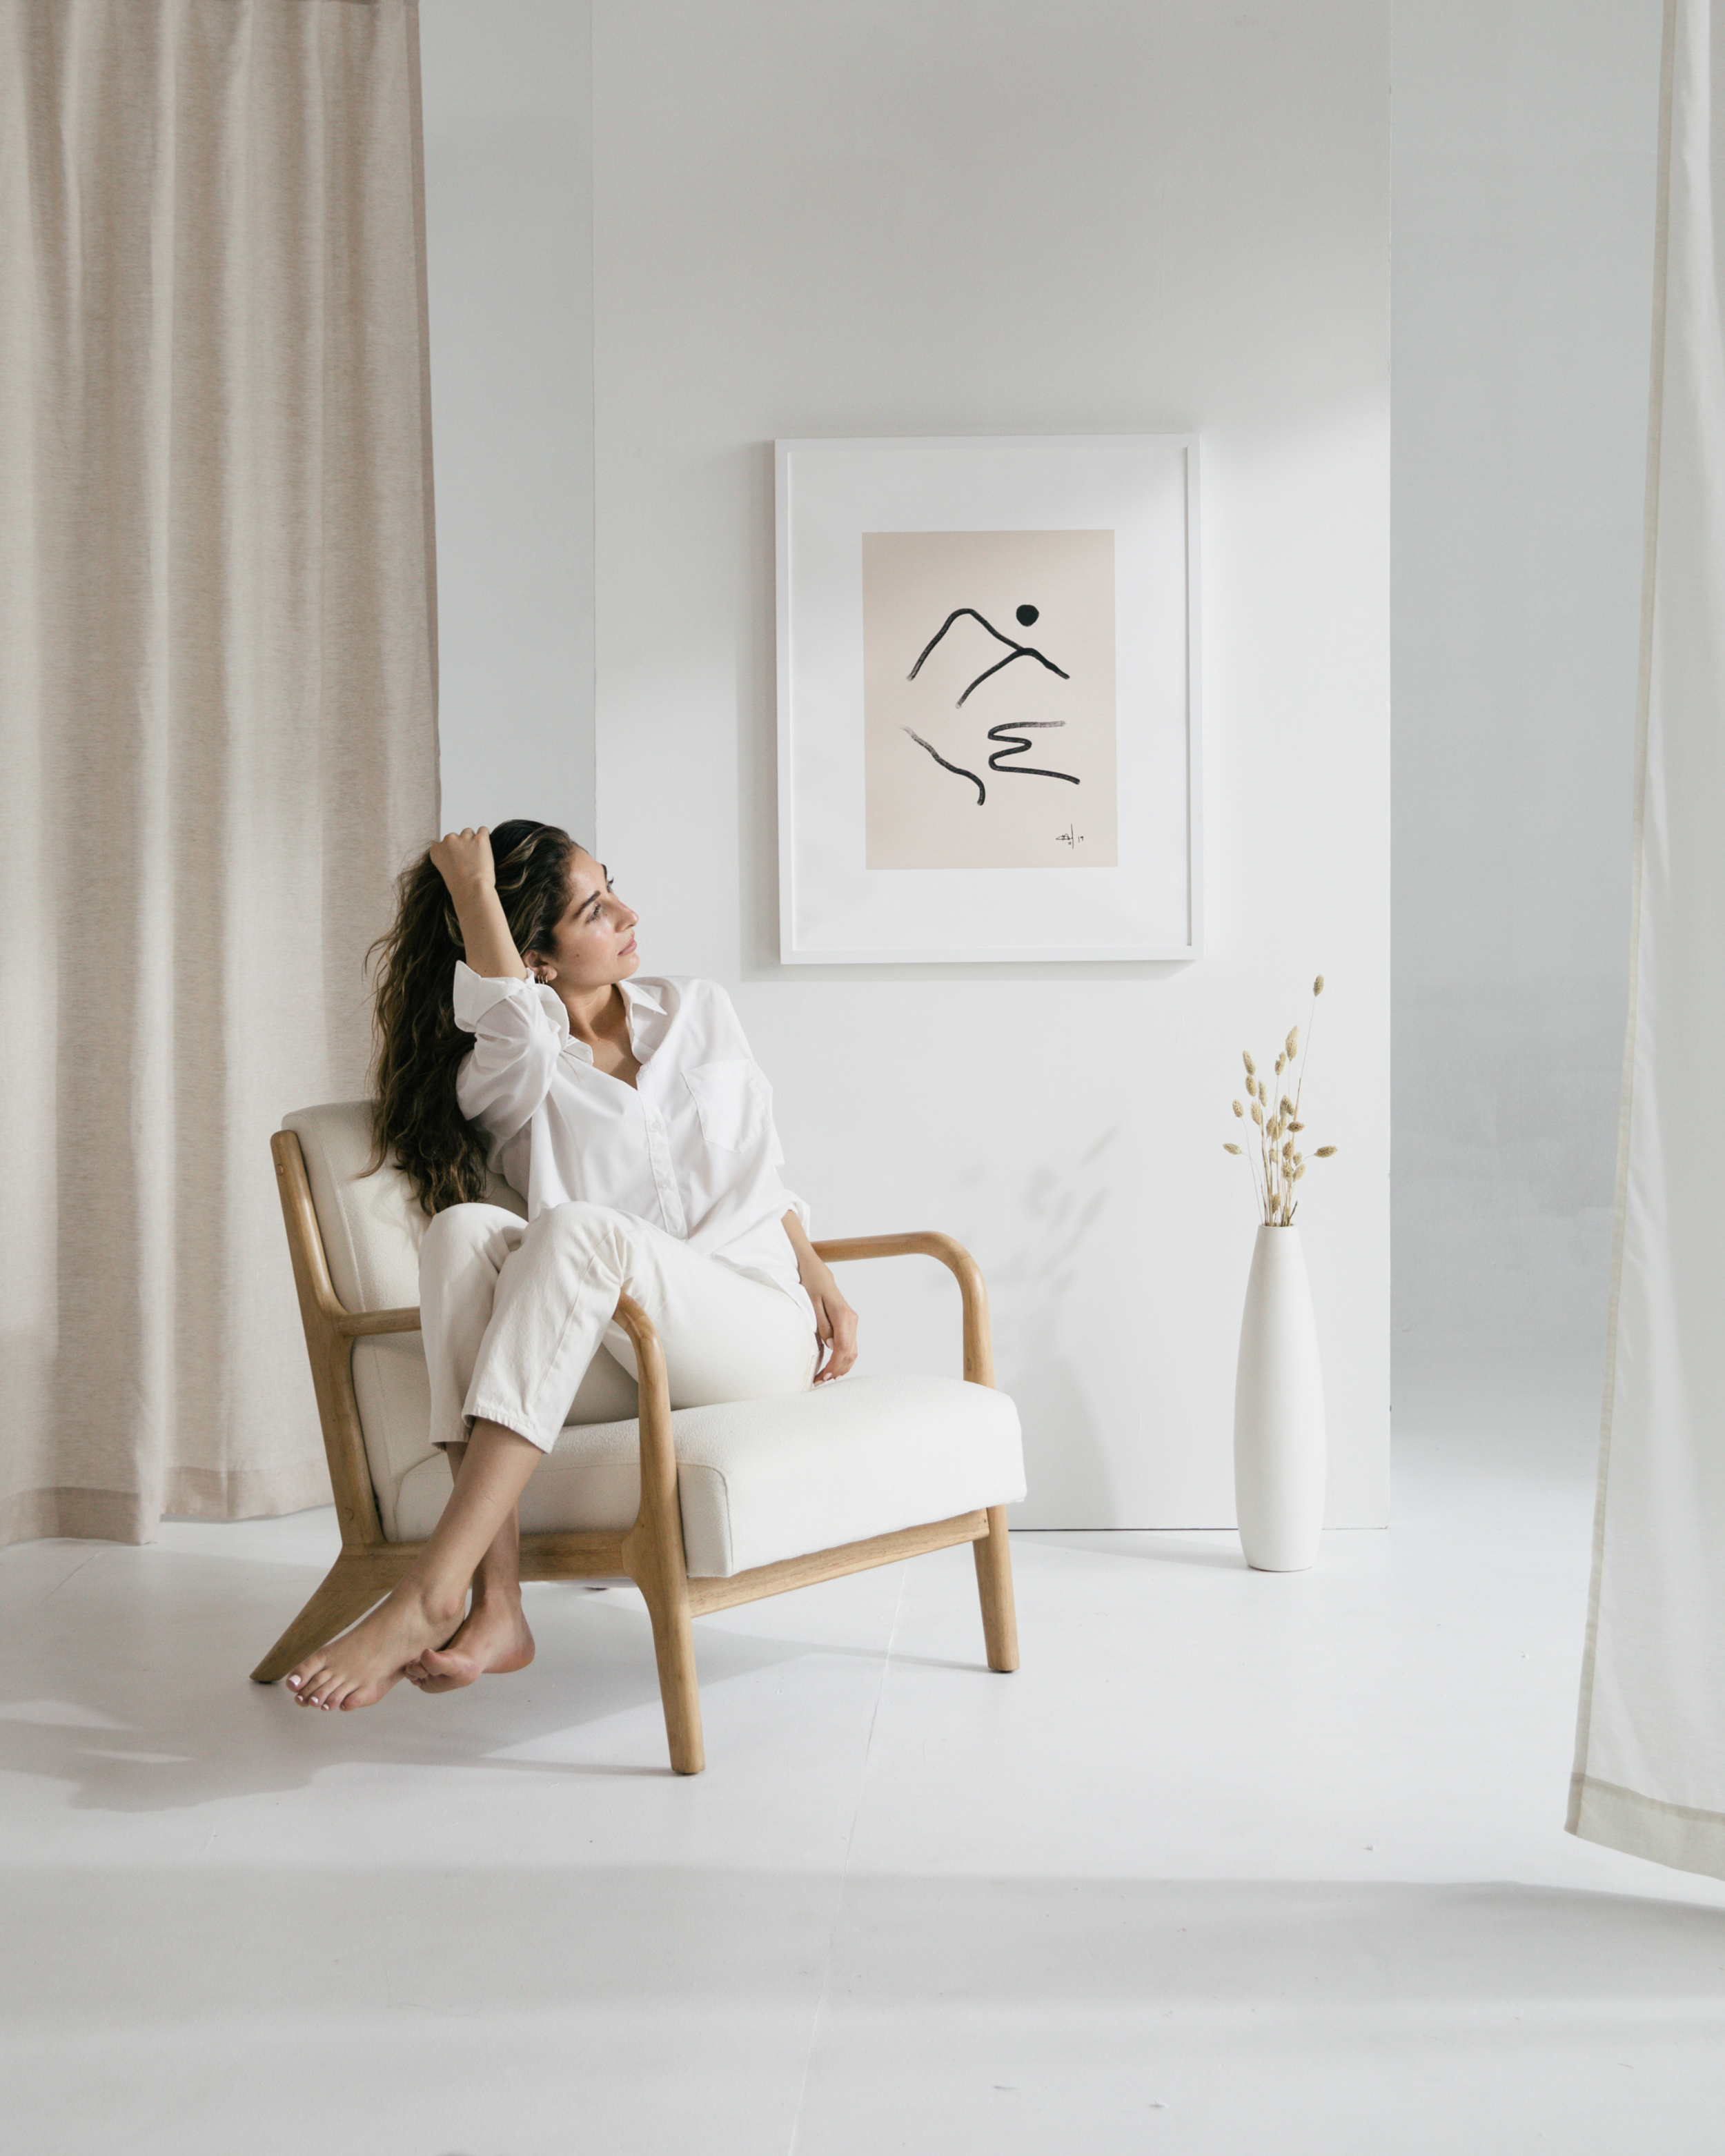 Woman relaxing on chair with minimal artwork on wall